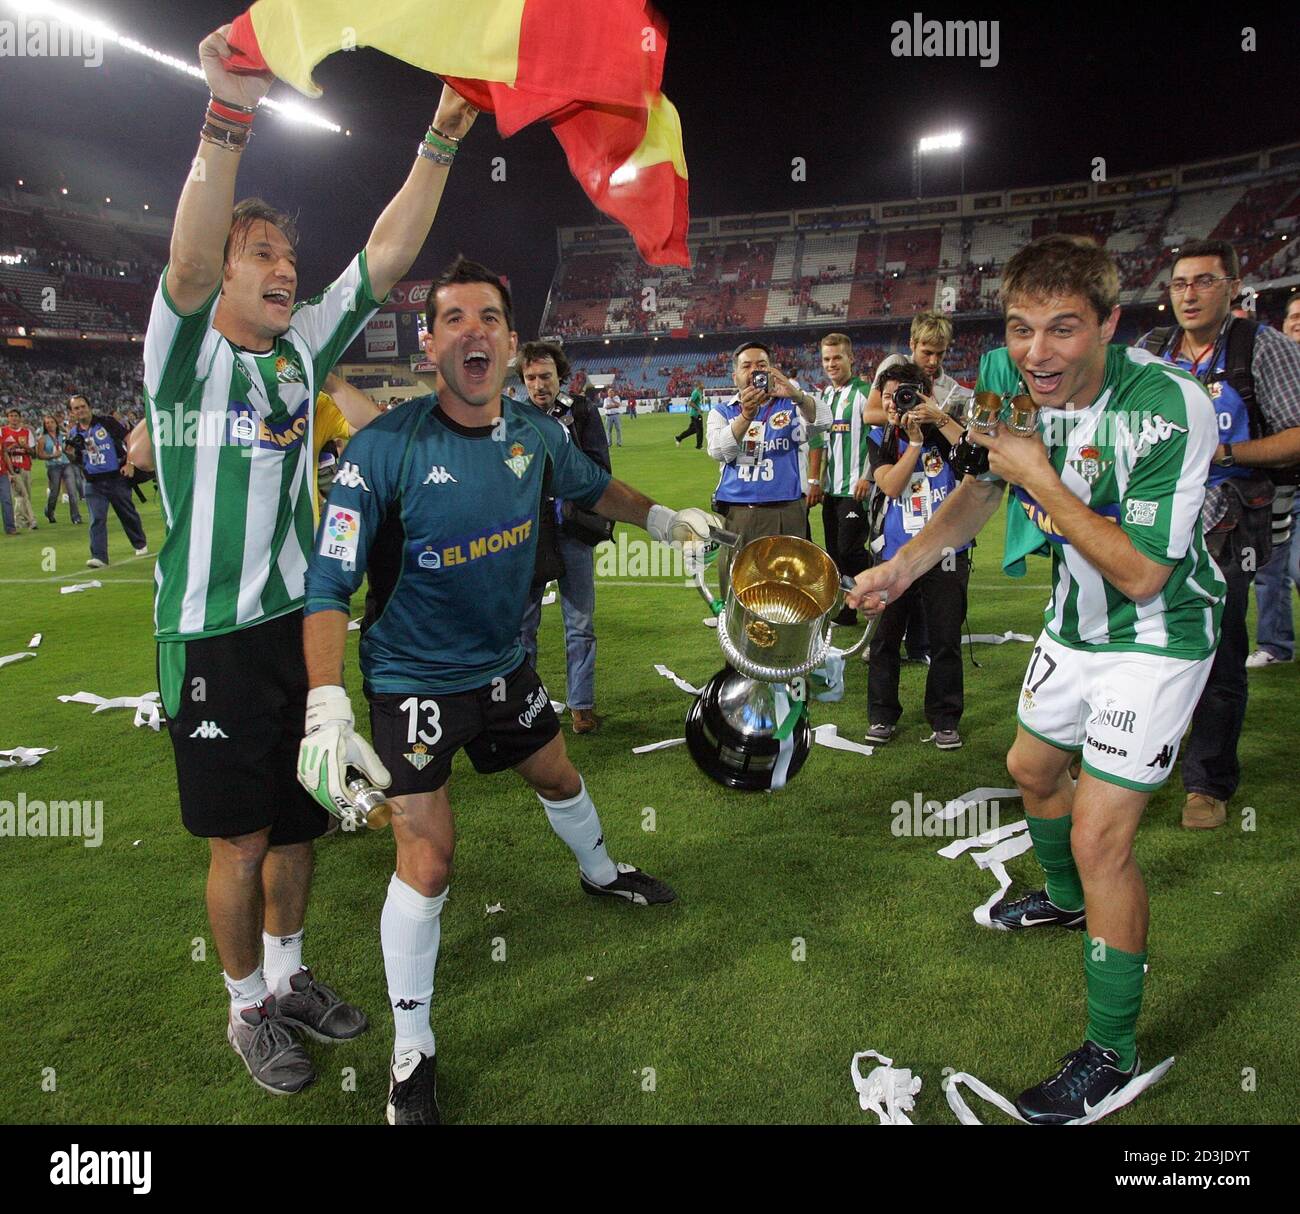 Page 10 - Joaquin Betis Soccer High Resolution Stock Photography and Images  - Alamy